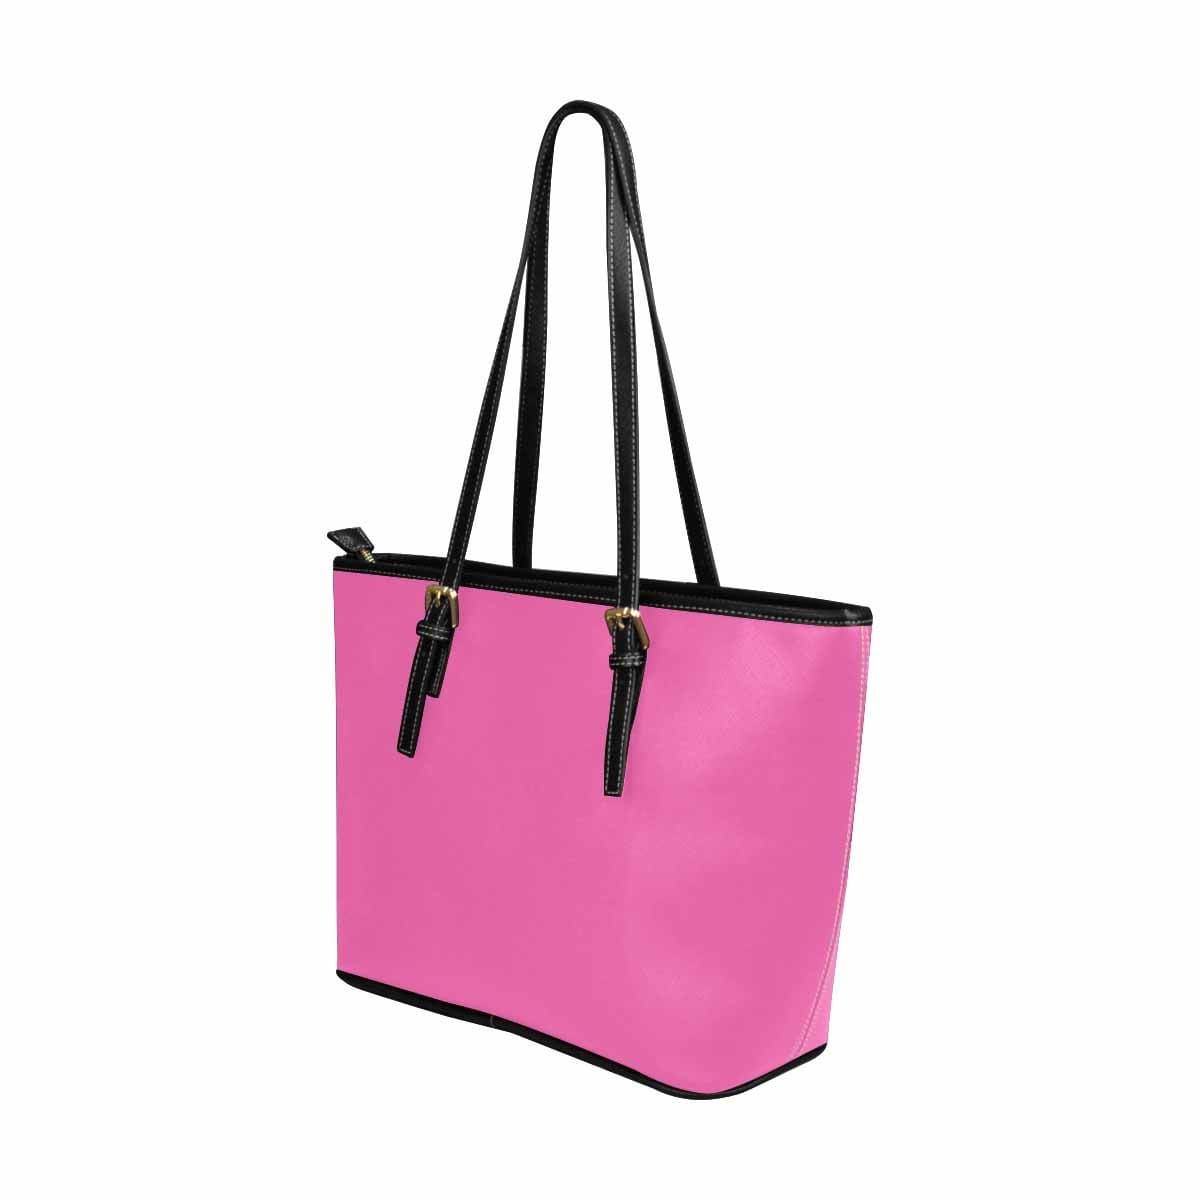 Large Leather Tote Shoulder Bag - Hot Pink - Bags | Leather Tote Bags